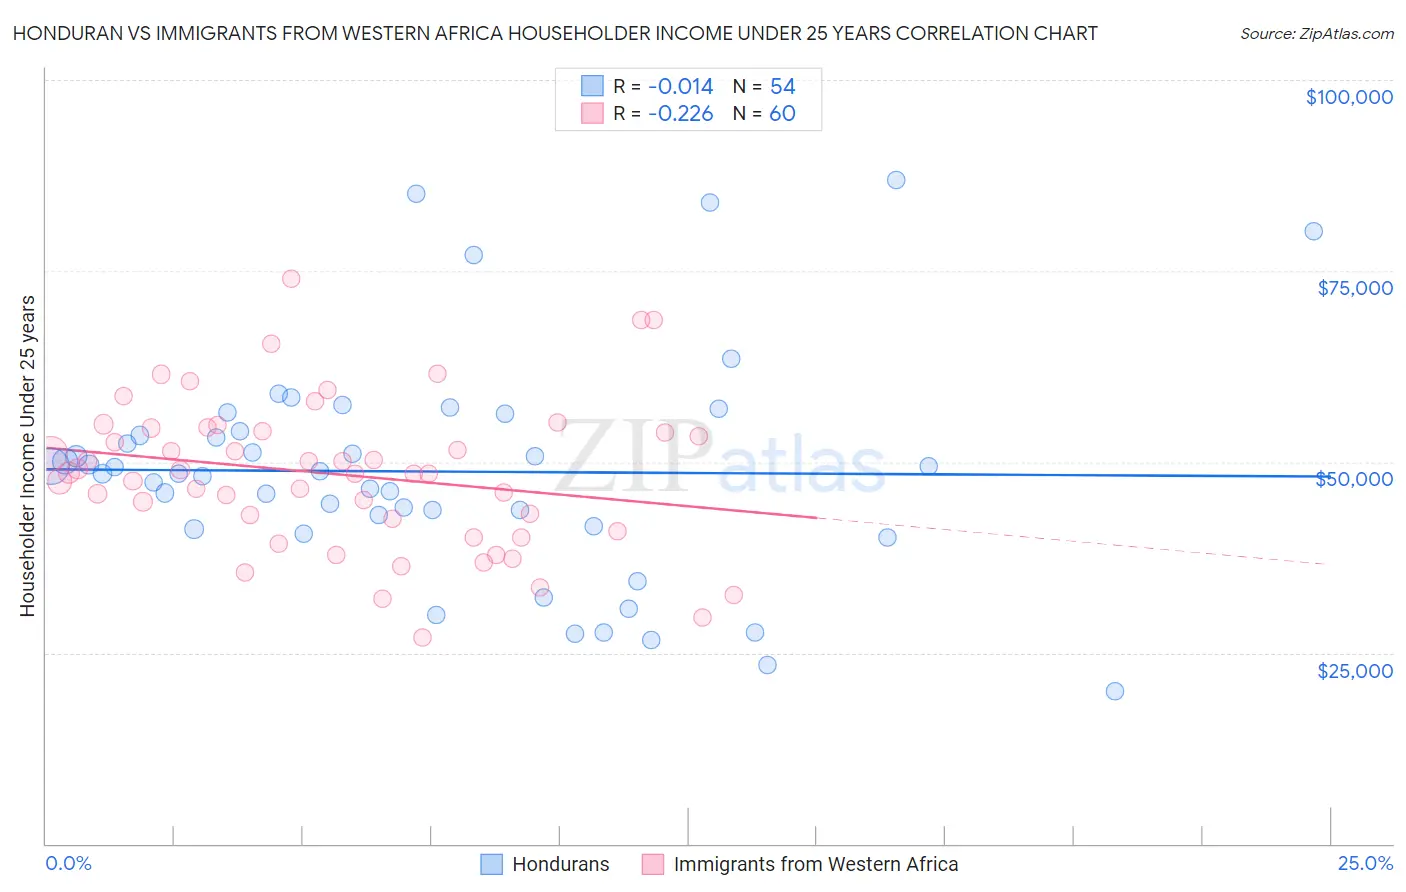 Honduran vs Immigrants from Western Africa Householder Income Under 25 years